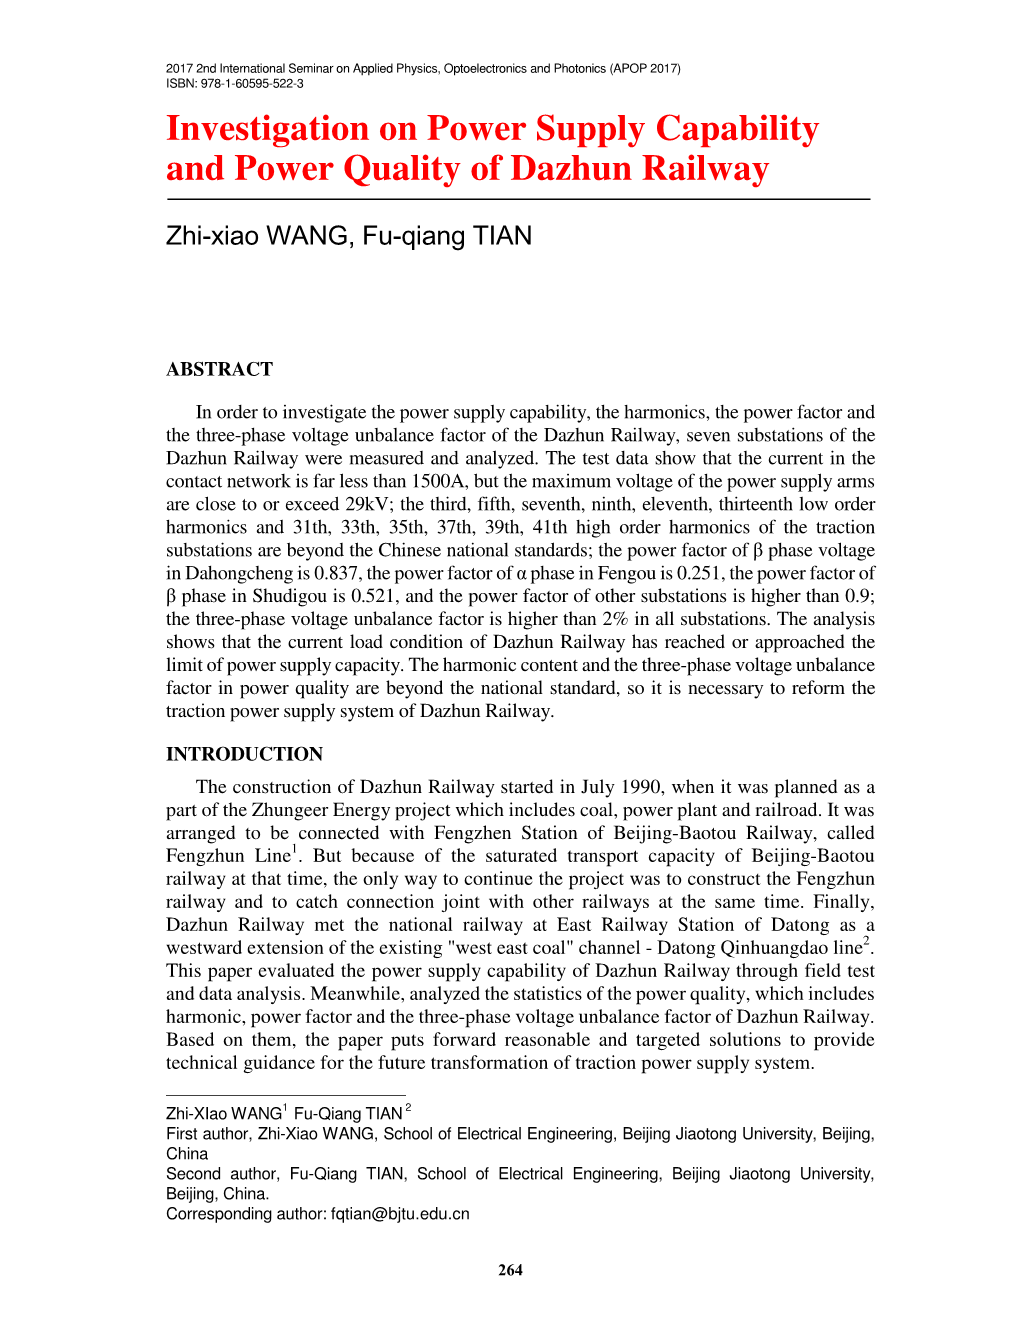 Investigation on Power Supply Capability and Power Quality of Dazhun Railway